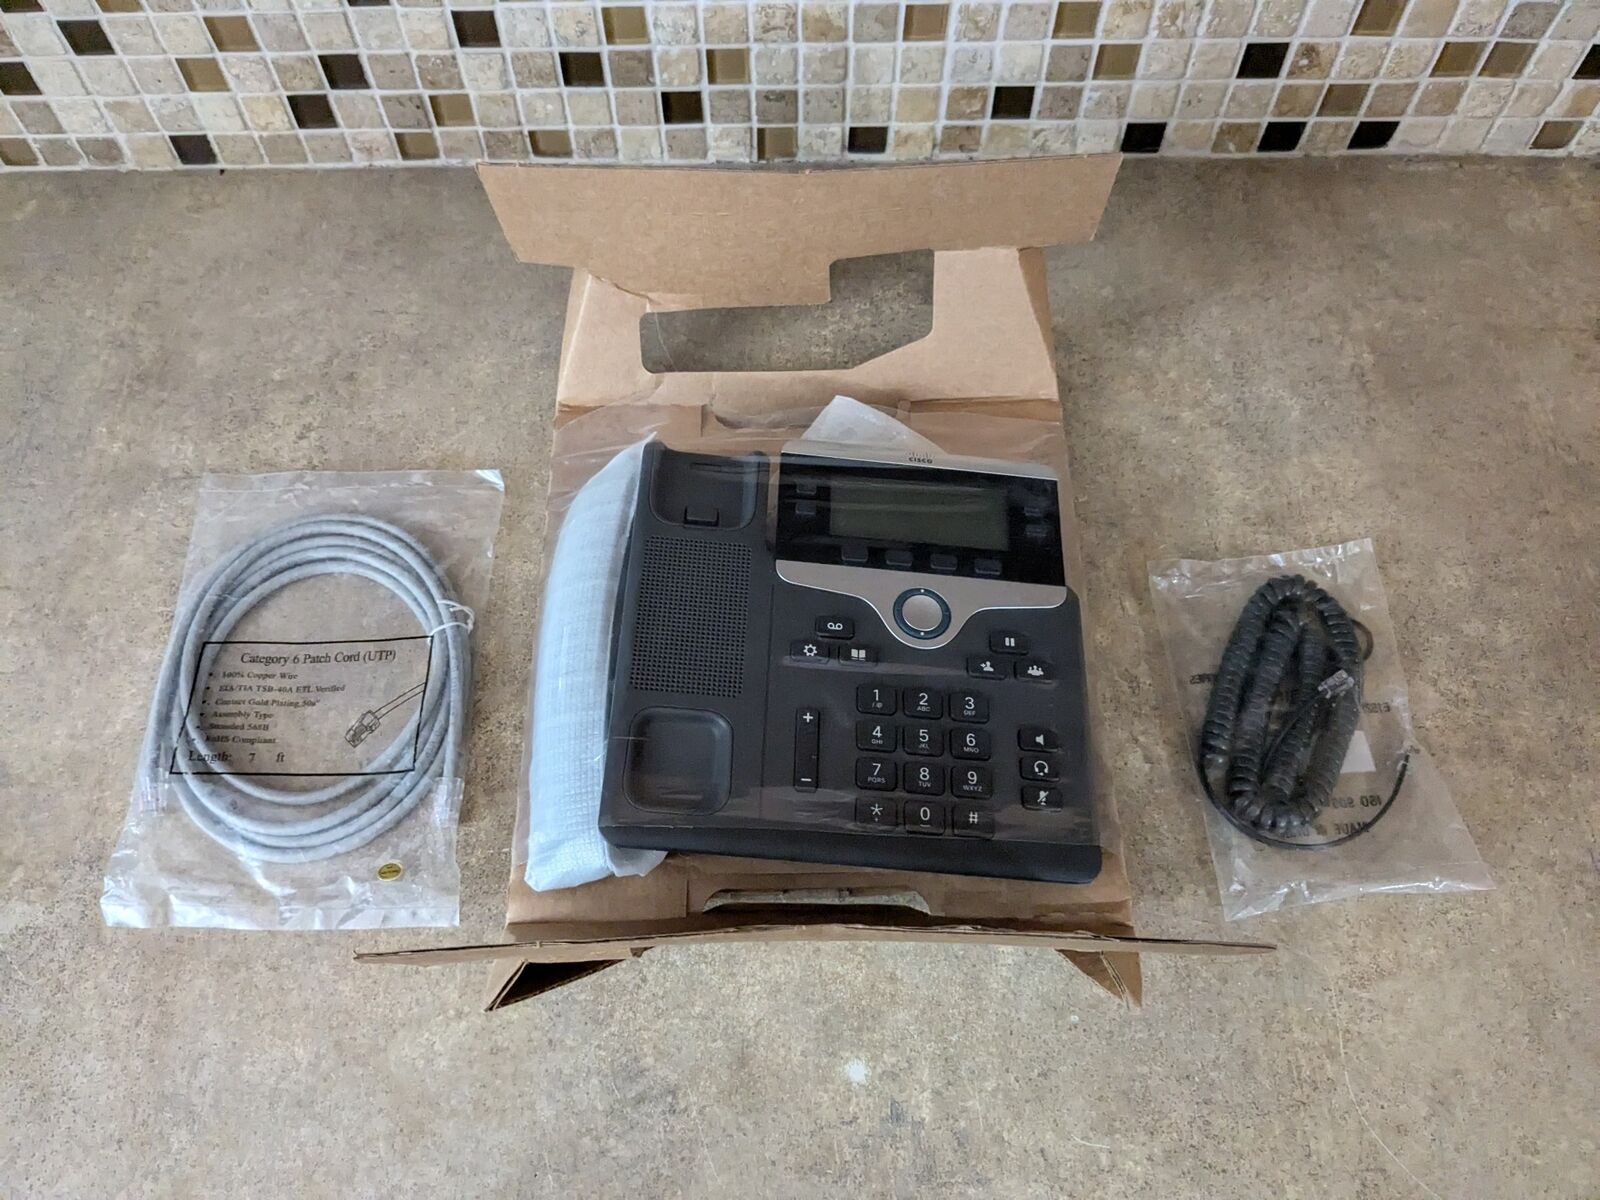 CISCO CP-7841-K9 VOIP PHONE W/STAND HANDSET UC BUSINESS IP PHONE